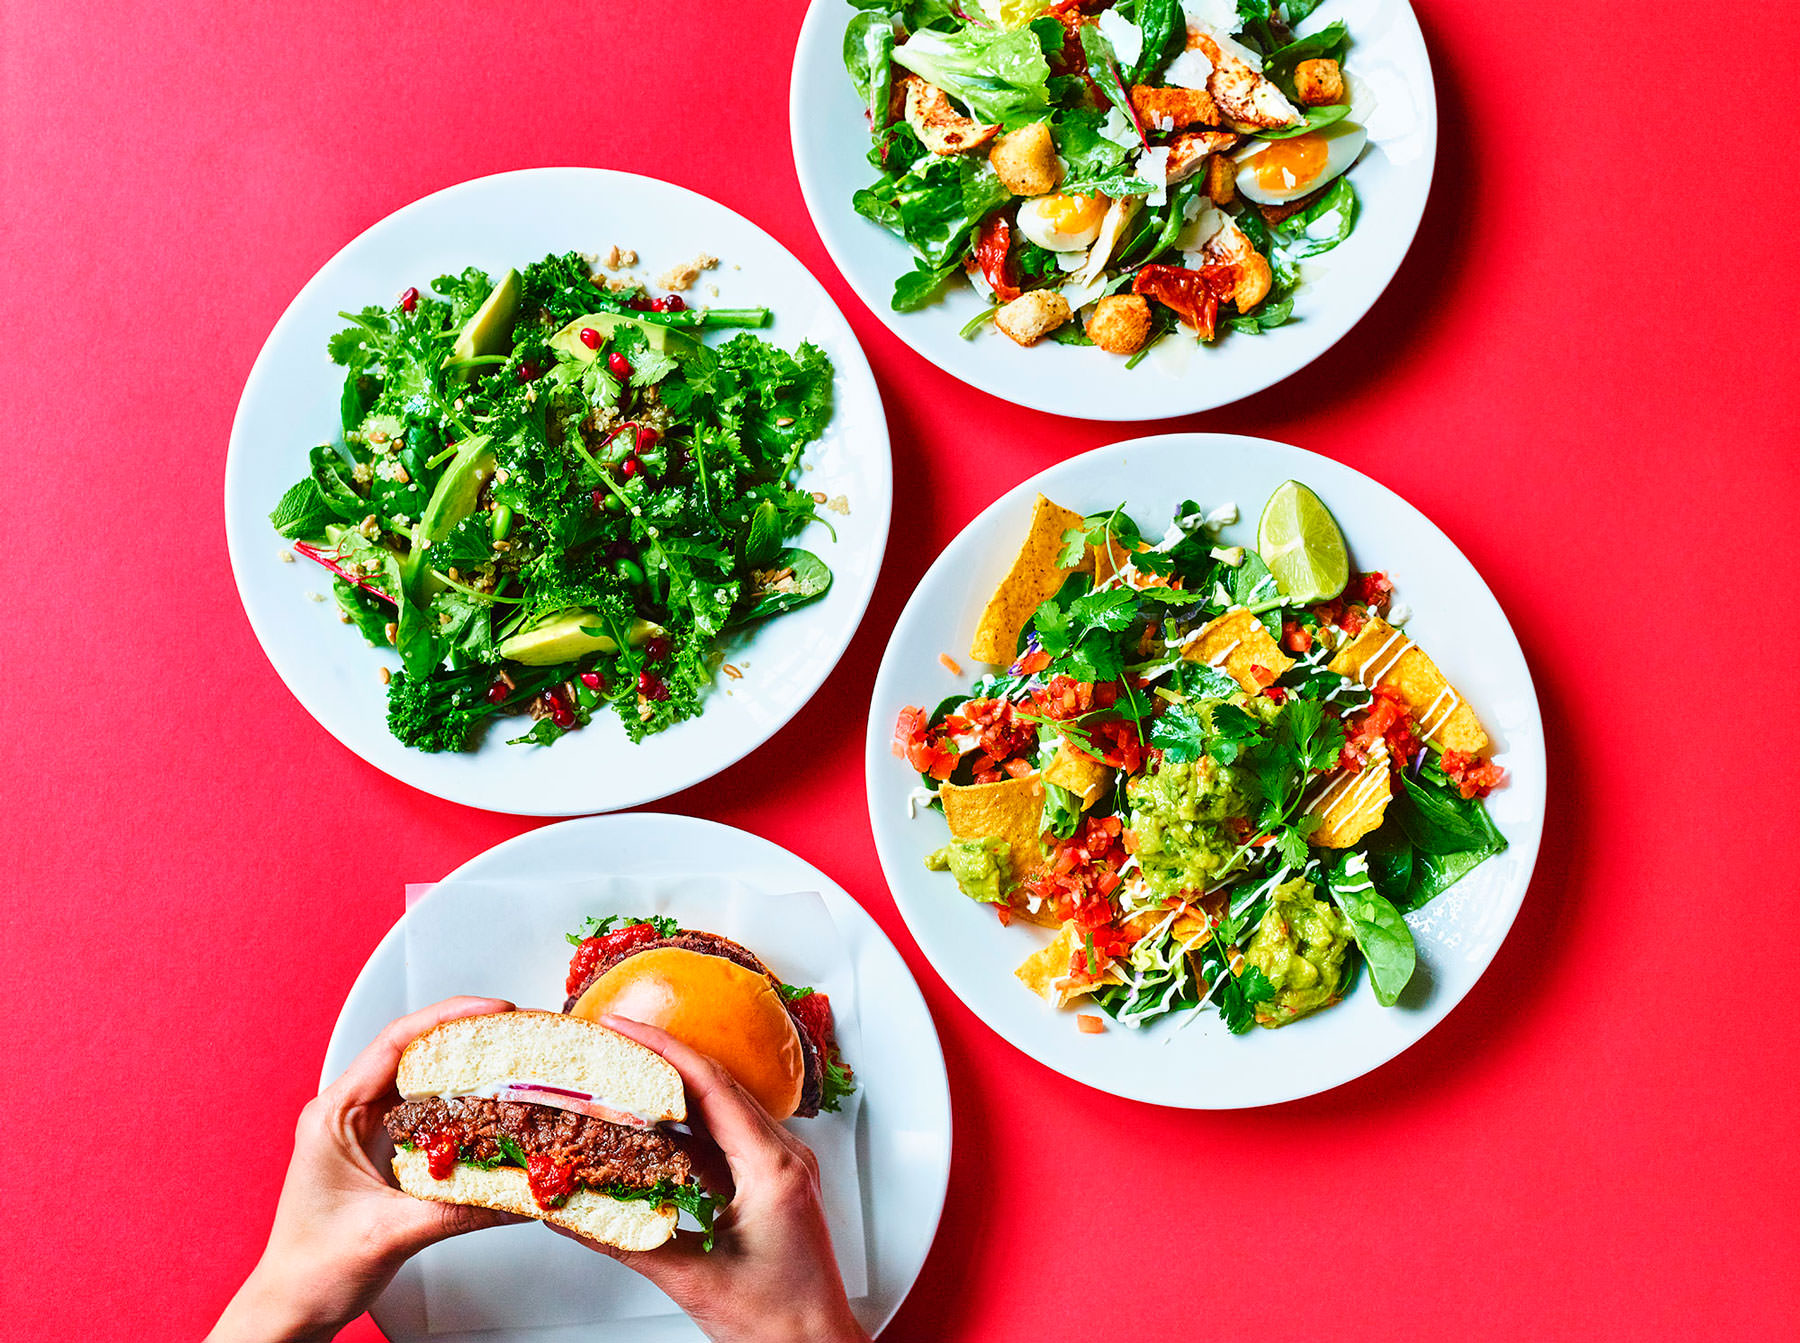 Biron burgers salads bowls on a red background - London Food & Drinks Photographer